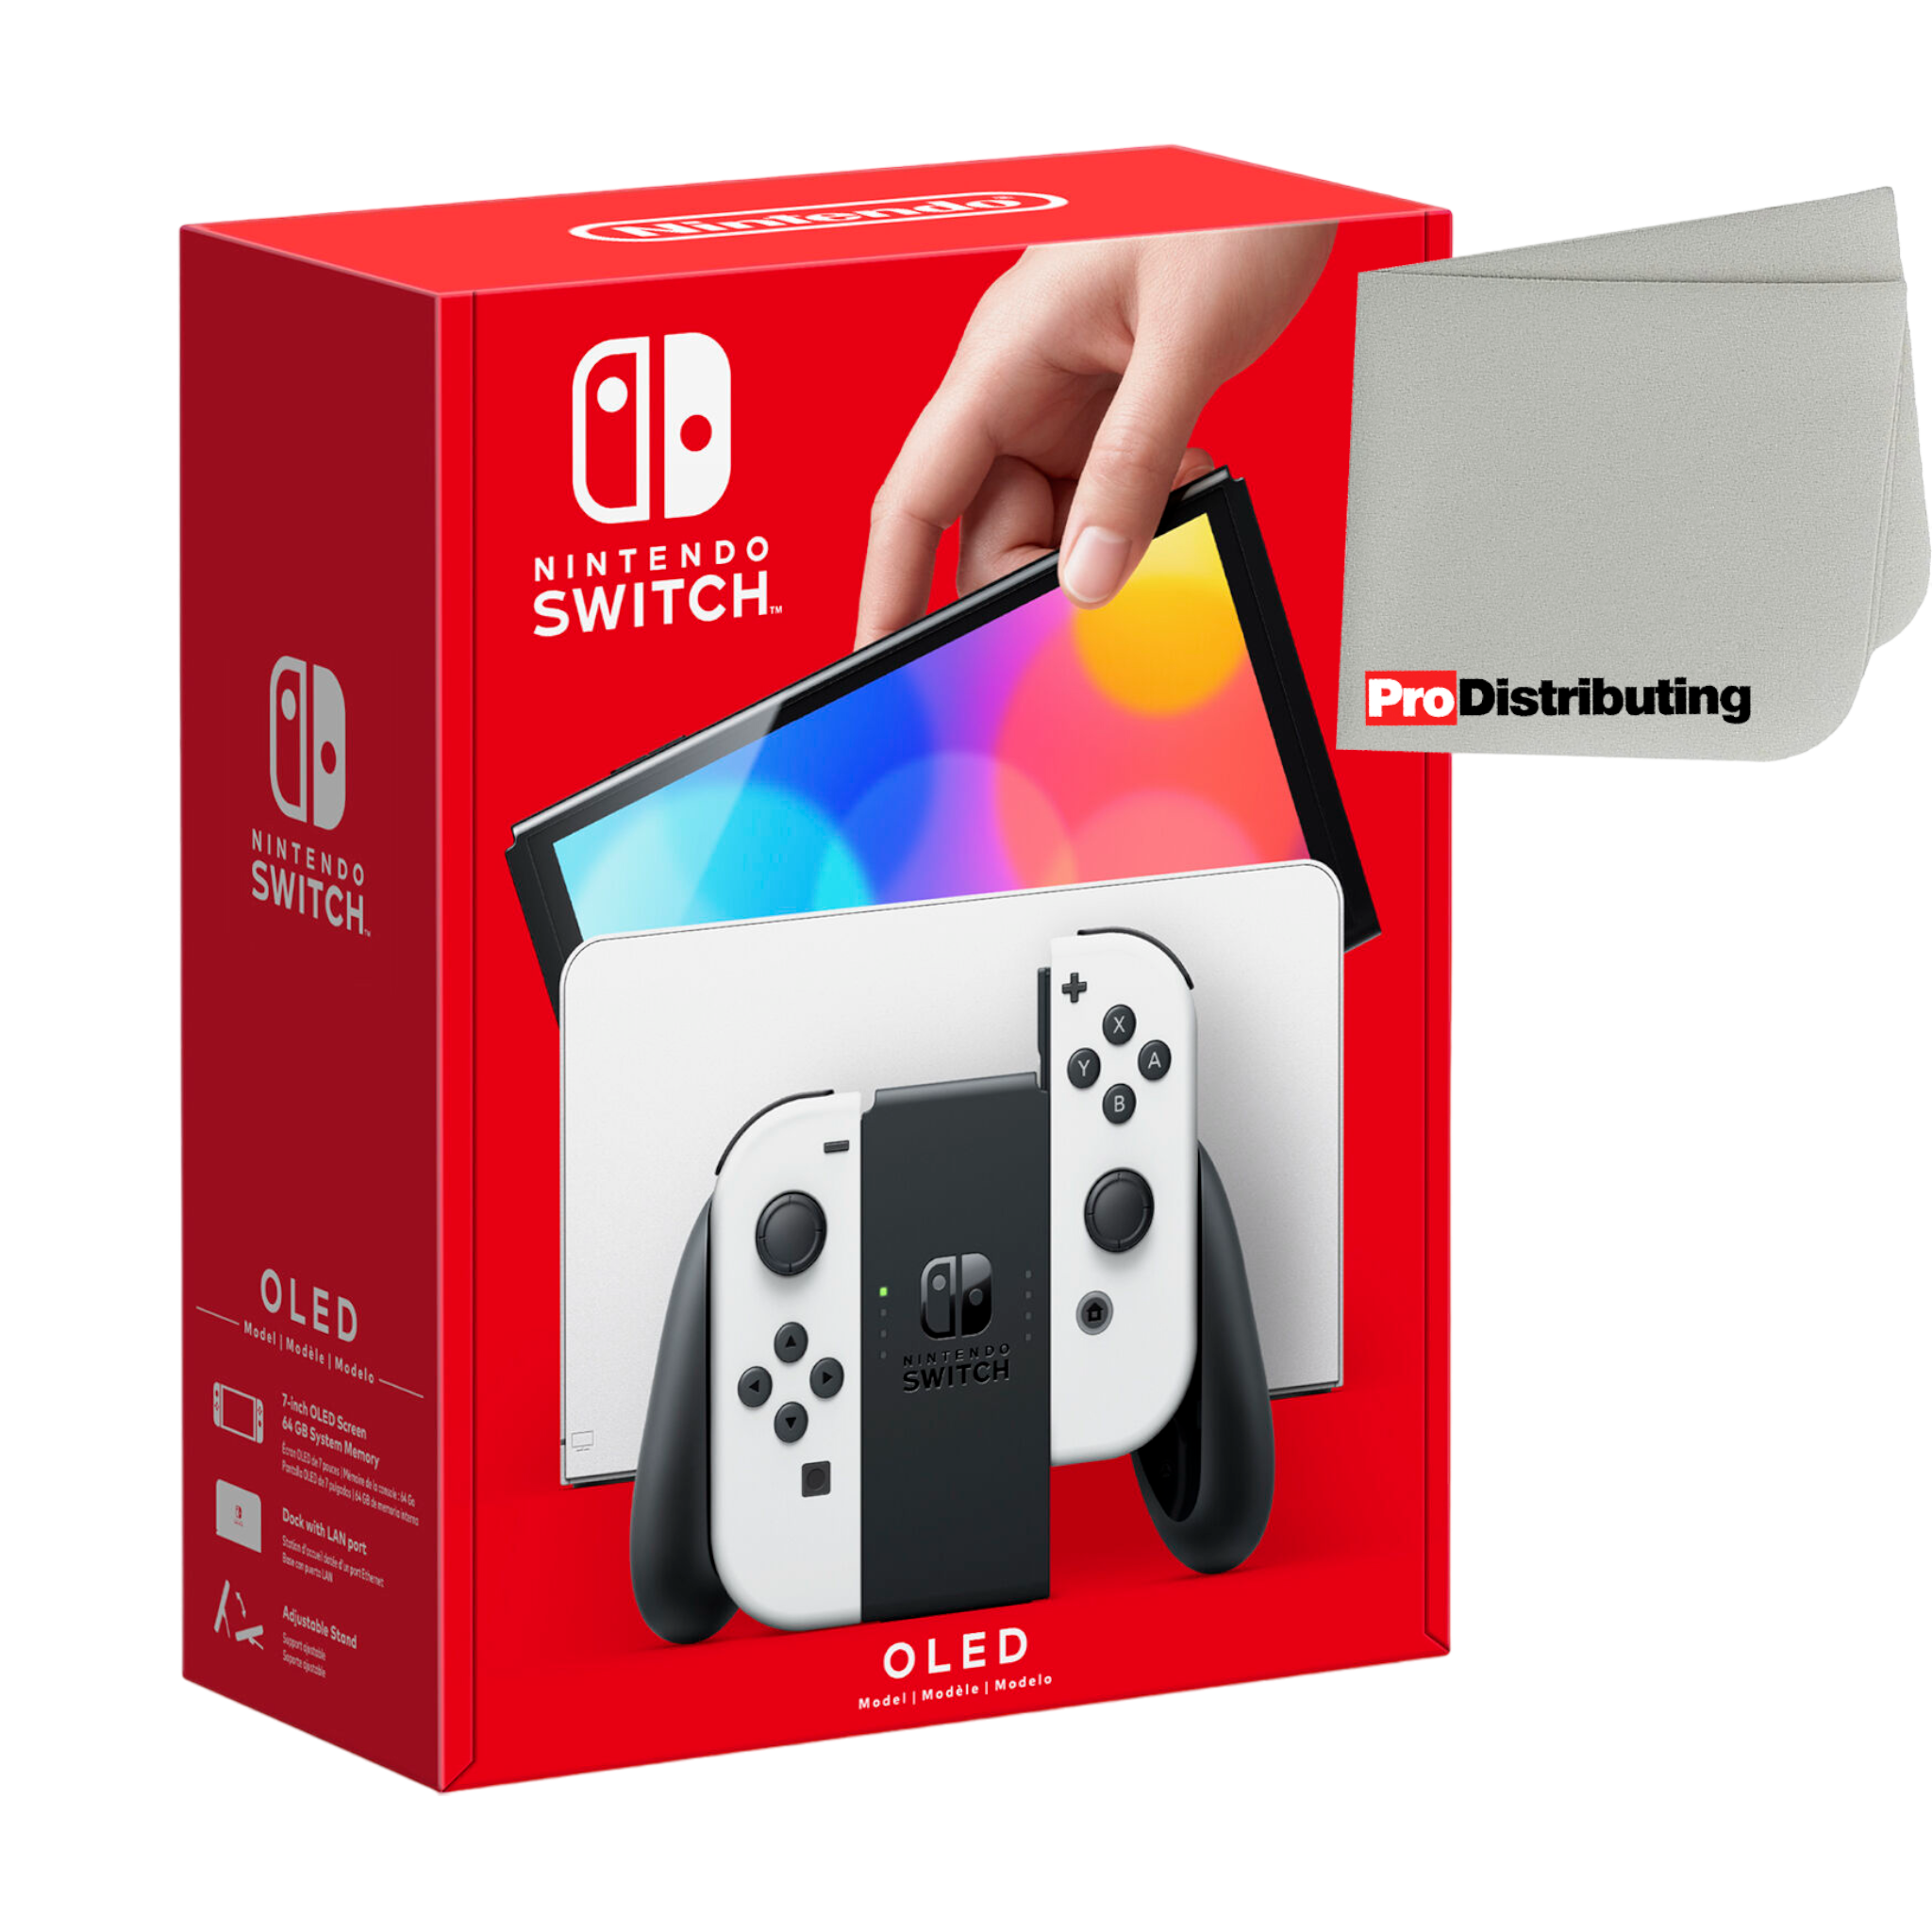 Nintendo Switch OLED Model (White Joy-Con, White Dock) with Microfiber Screen Cleaning Cloth - Pro-Distributing